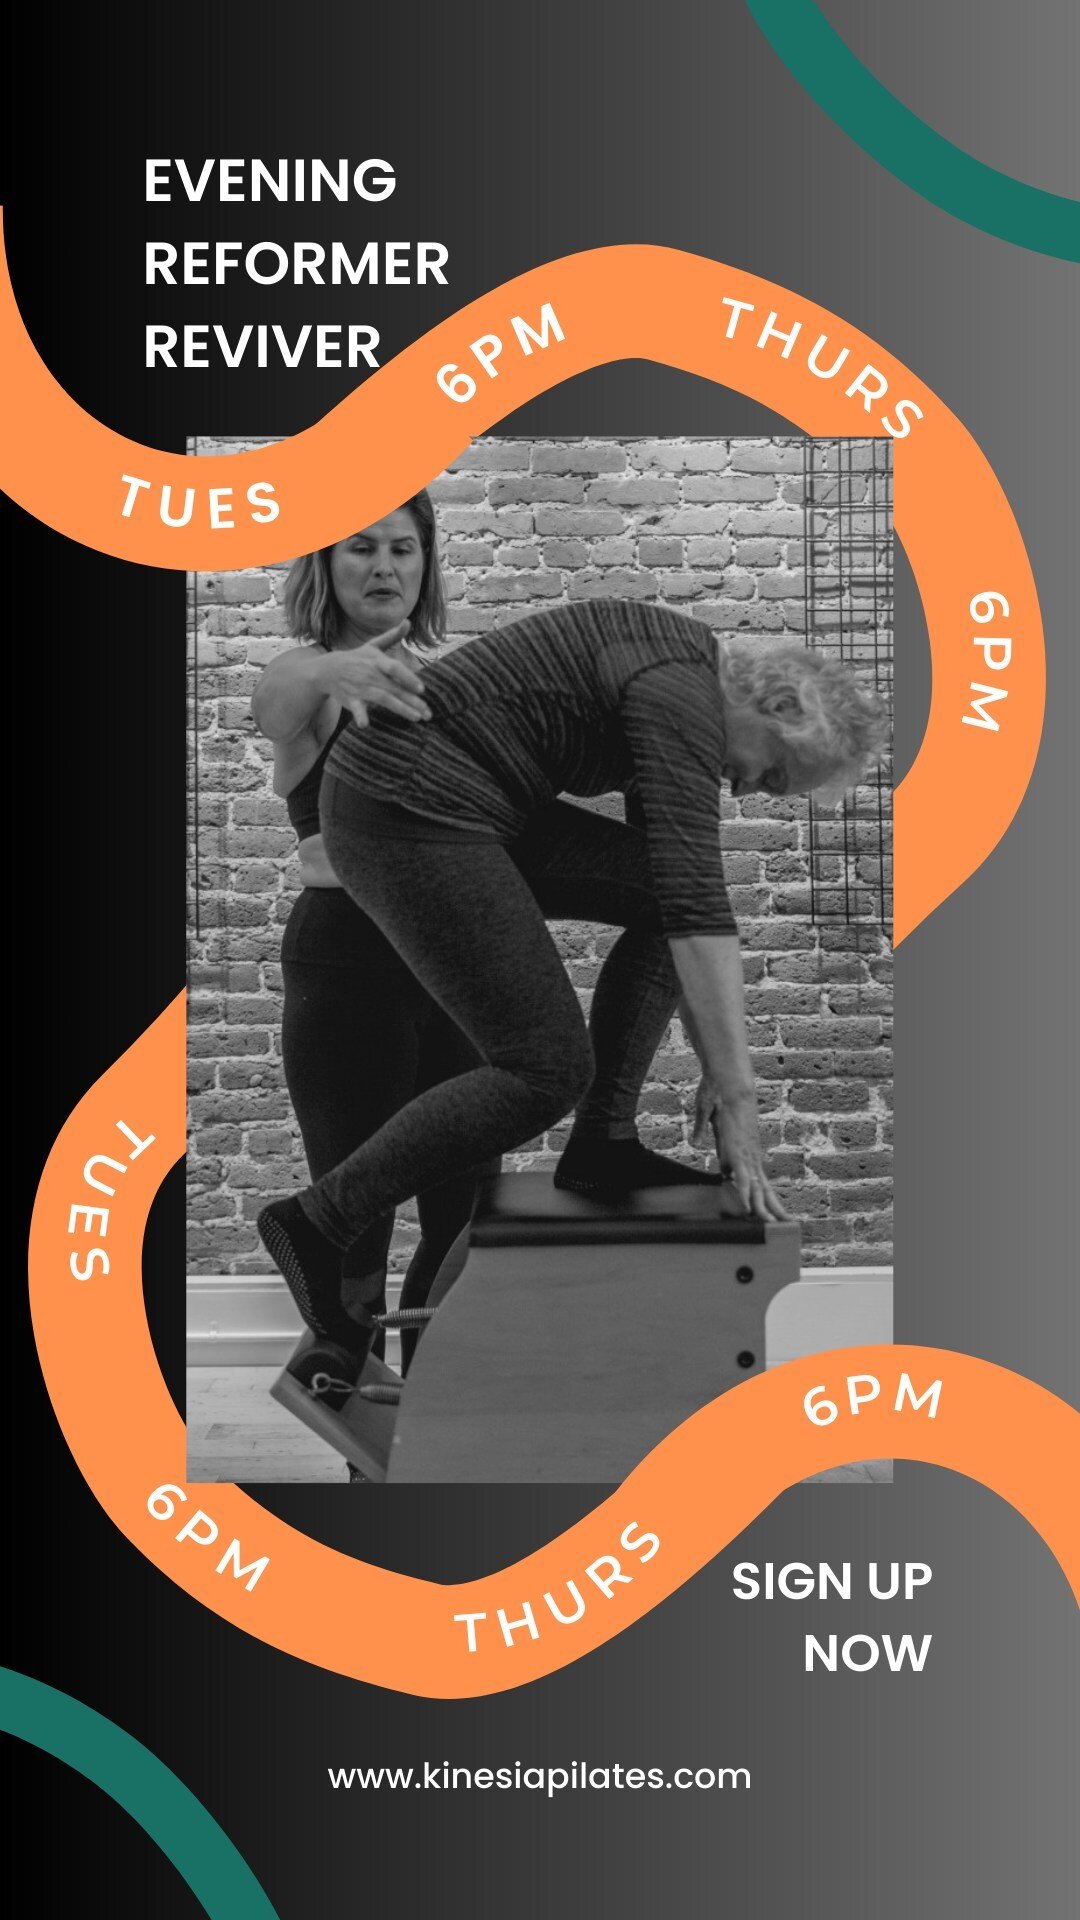 Step up your self-care routine with post-workday Pilates! 💪 Join our Recharge Reformer classes on Tuesday and Thursday evenings for workouts that'll energize, boost your mood, and help relieve postural discomfort! 🤩

✨Reserve your spot now! ---&gt;